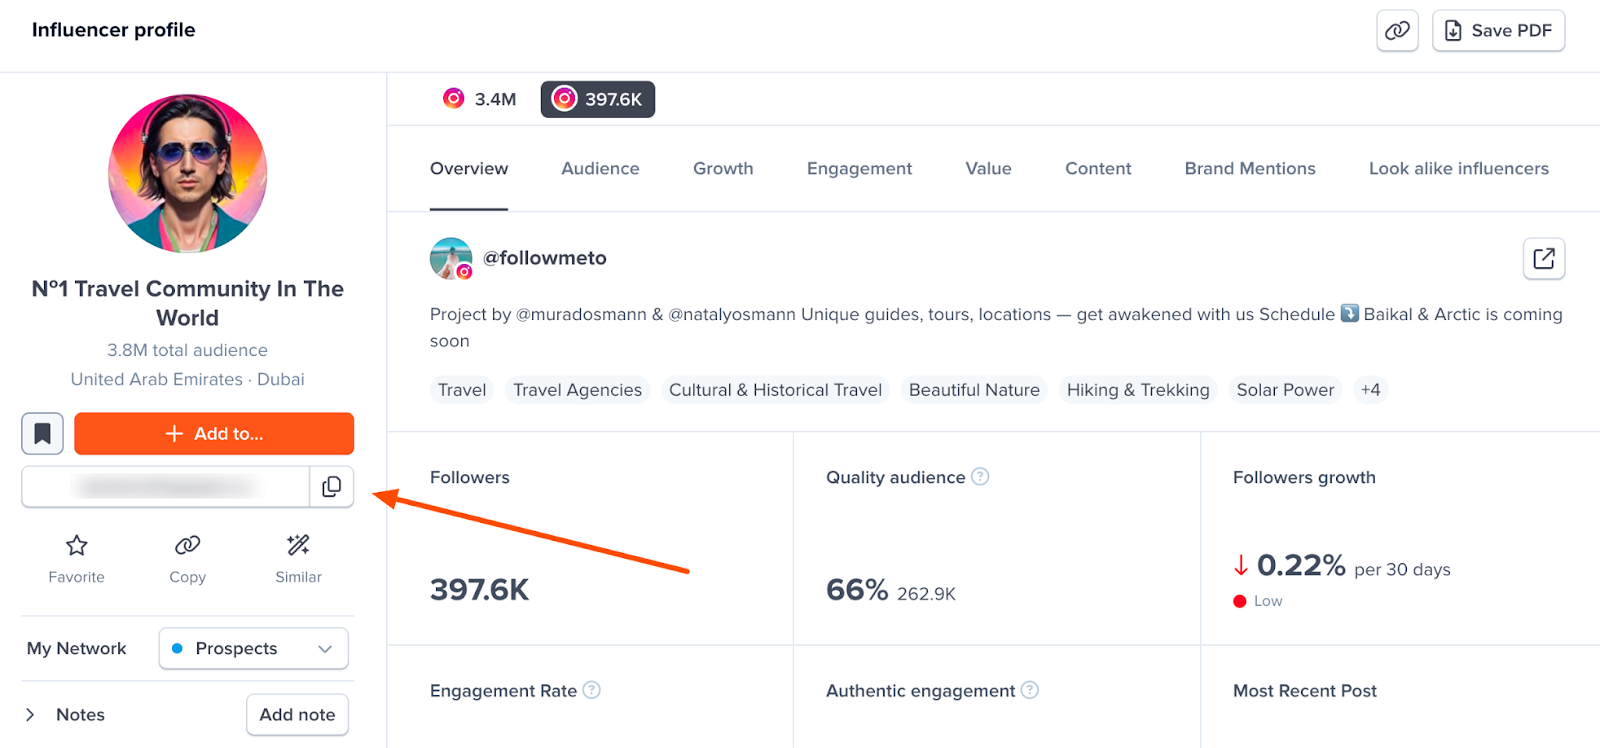 Influencer's contact details in a HypeAuditor report